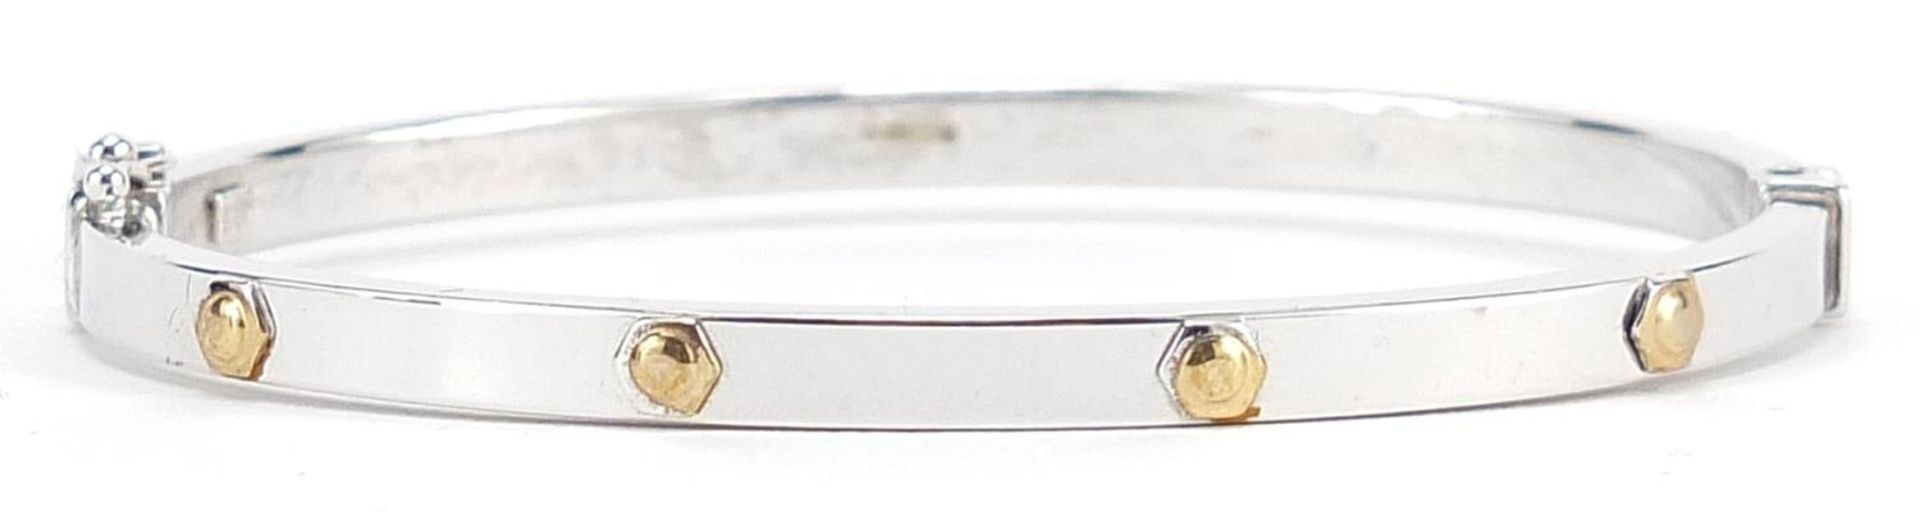 Cartier style 9ct two tone gold bangle, 6.6cm wide, 7.0g